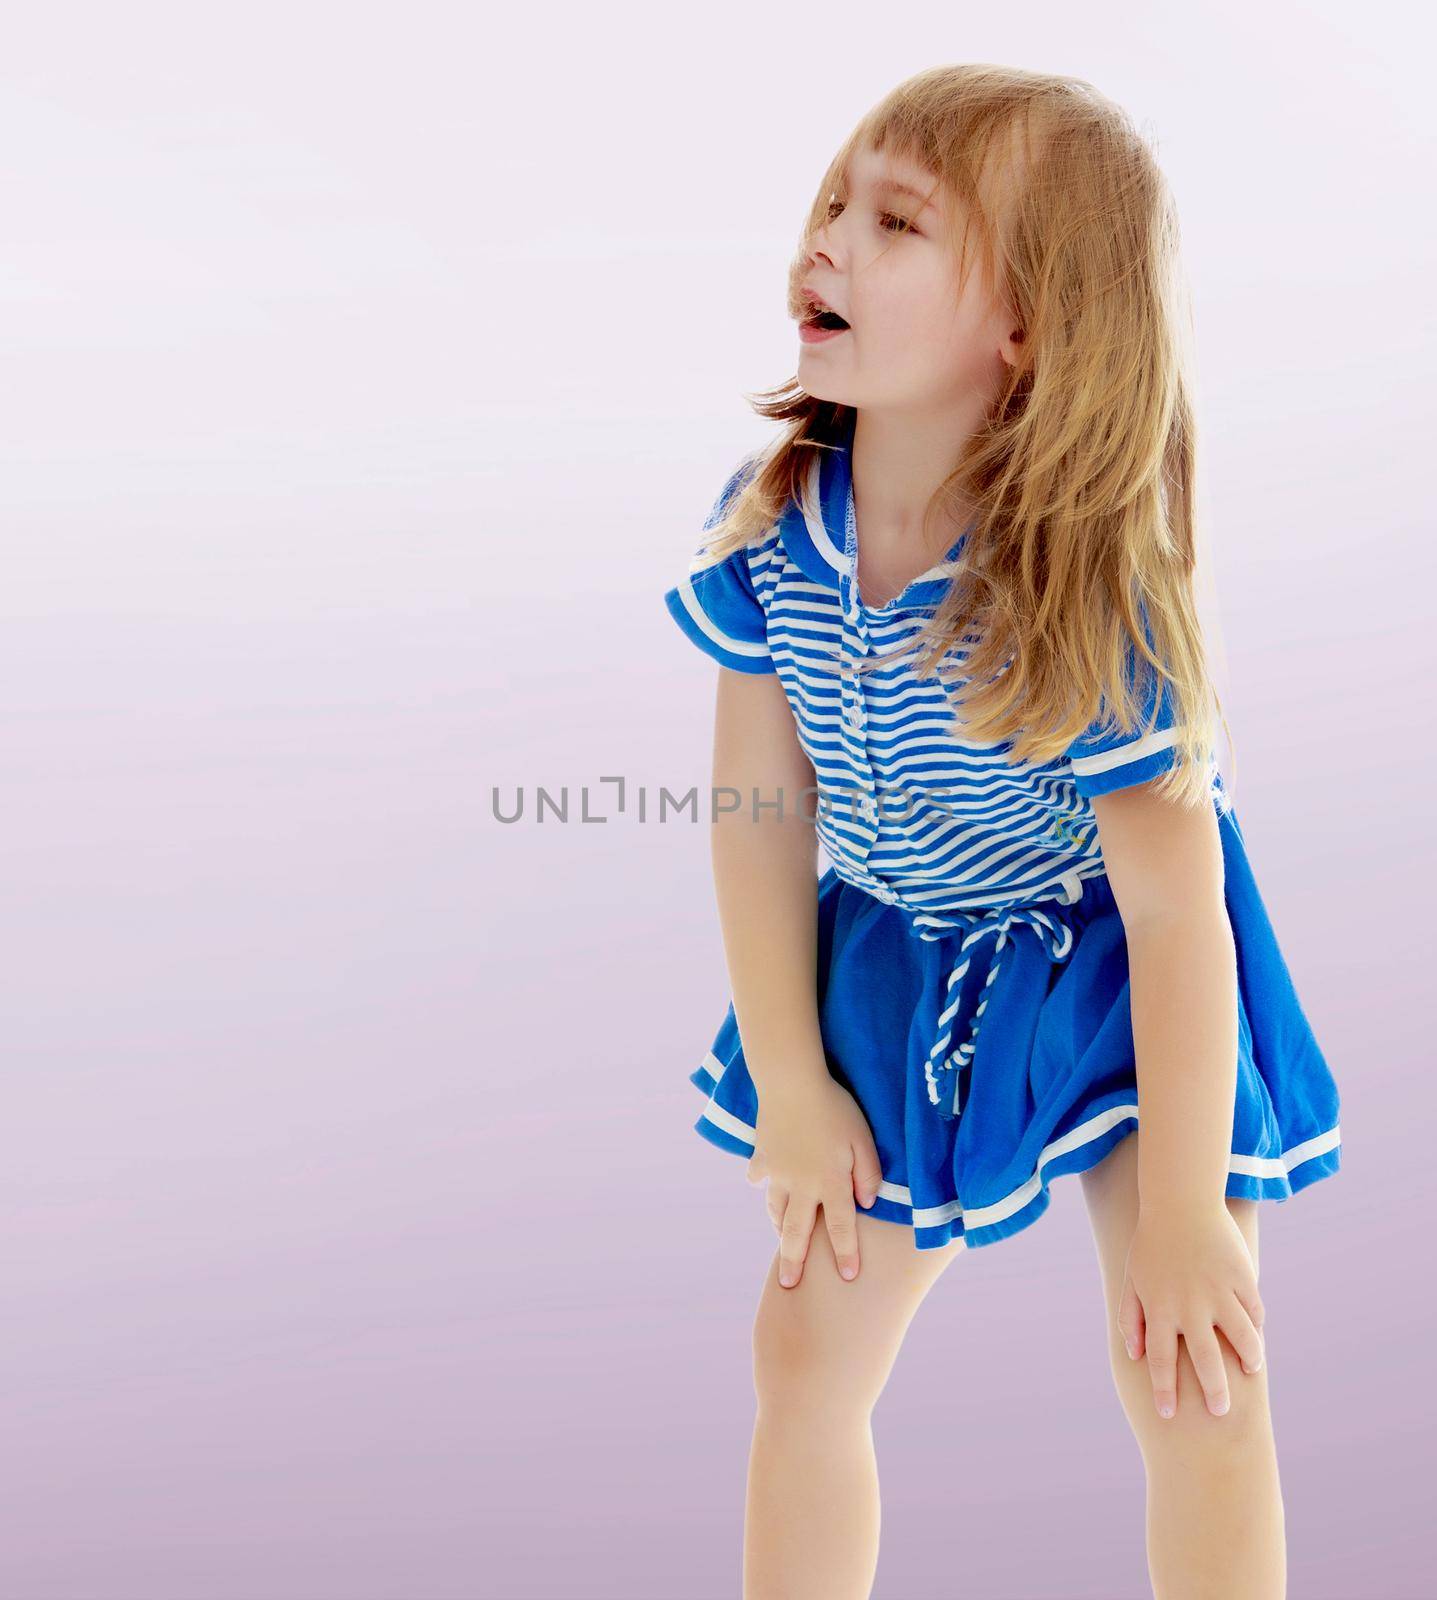 On a purple background, smooth transition from dark to light. Cute little unkempt girl in a short blue dress. Girl looking to the side with his hands on his knees.